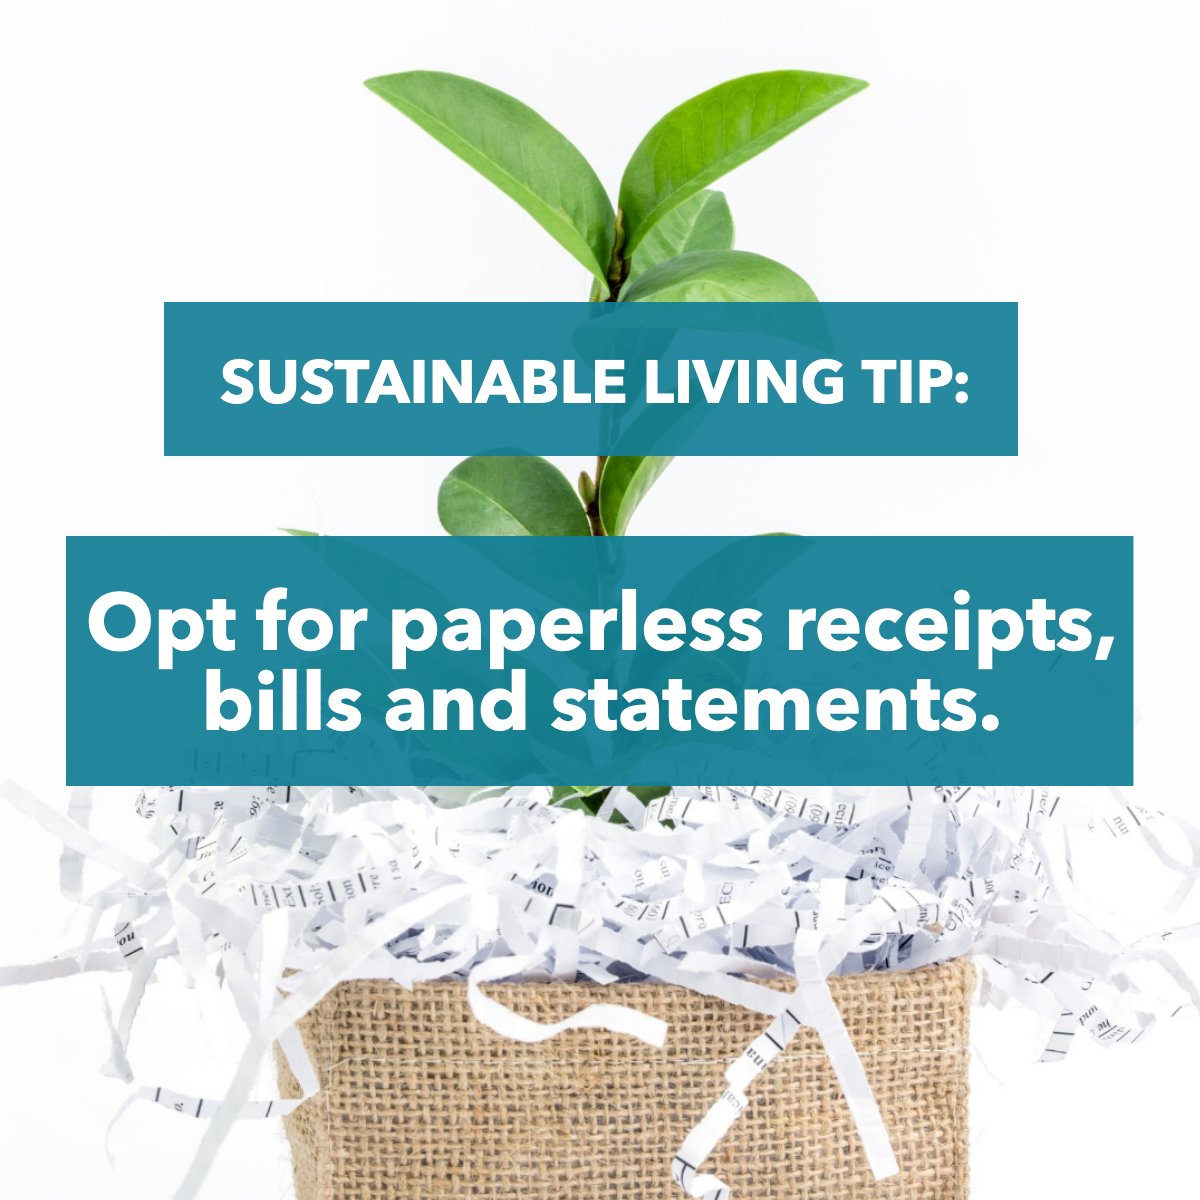 Let's do our part! 

Let's save paper 📄 with this useful tip! 

#green #paperless #sustainableliving #tip
 #swflrealtor #swflrealestate #floridarealestate #florida #newconstruction #homebuying #homebuyingprocess #homebuyingtips #househunting #fsbo #Teamswflelite